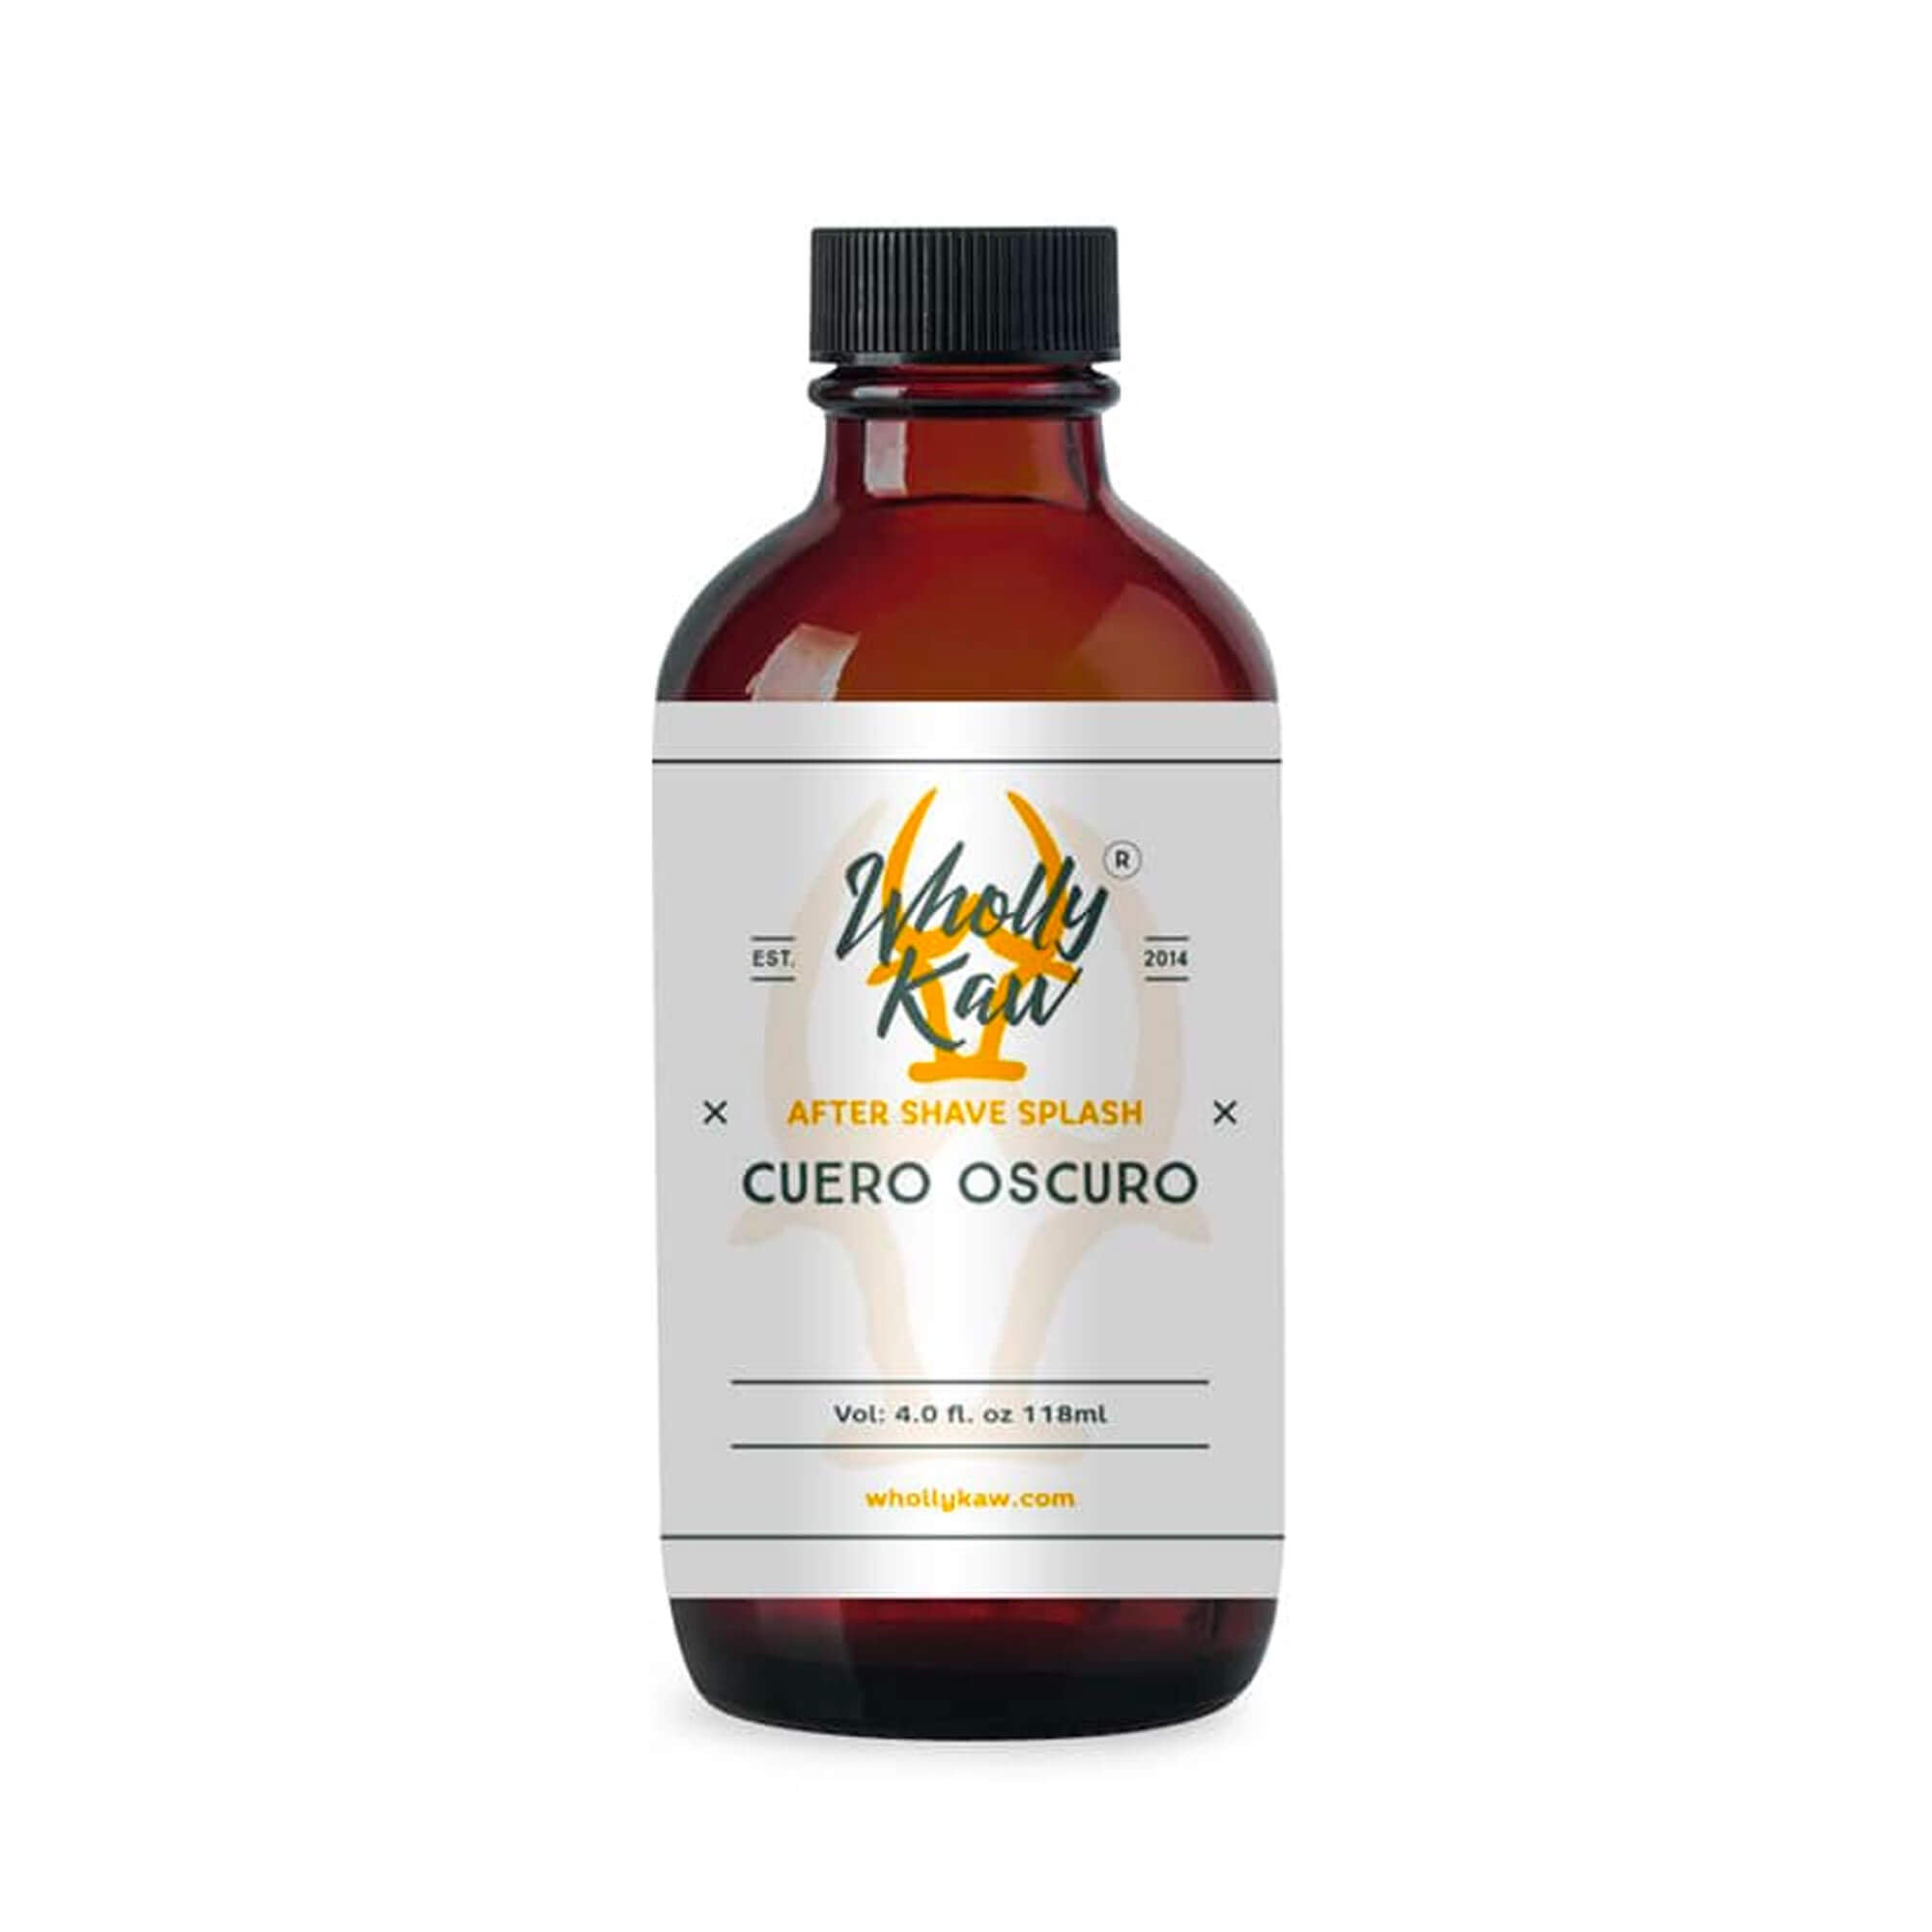 Wholly Kaw Cuero Oscuro Aftershave Splash